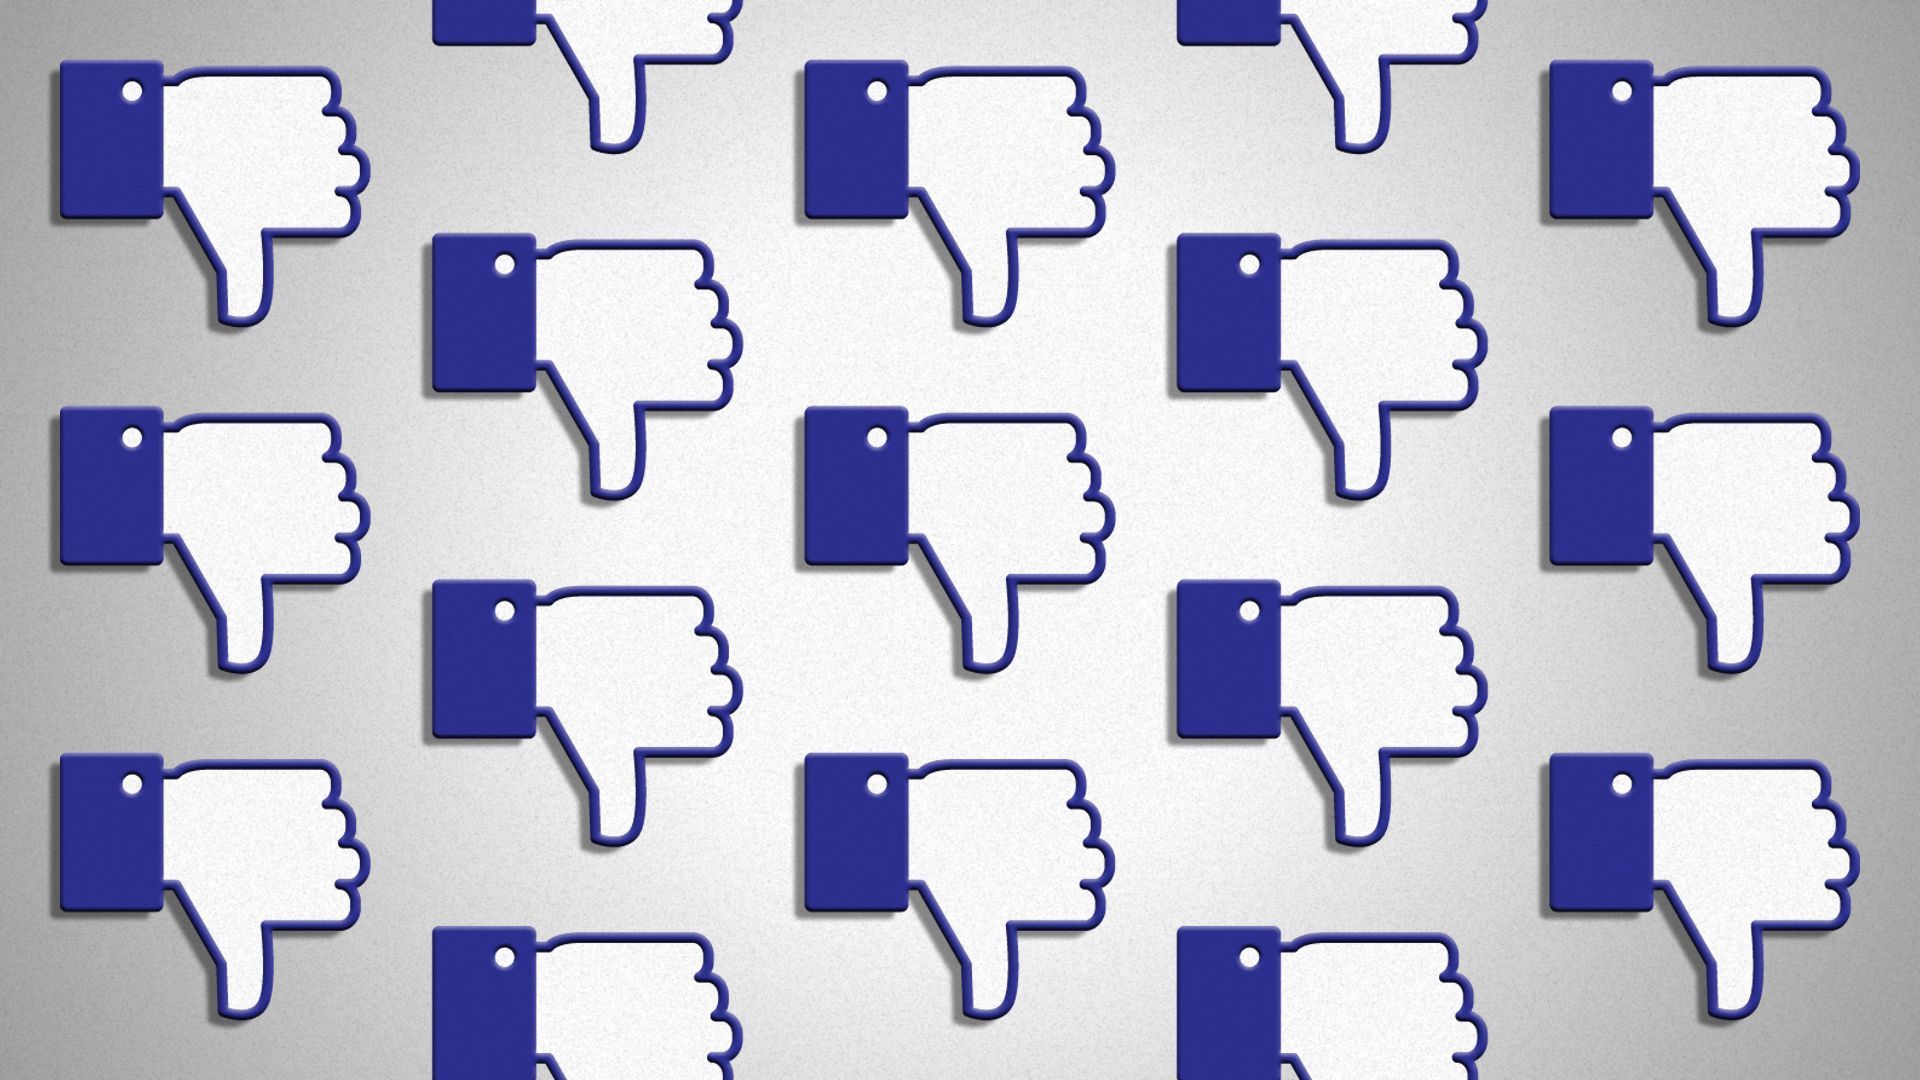 Illustration of a pattern of Facebook thumbs down.